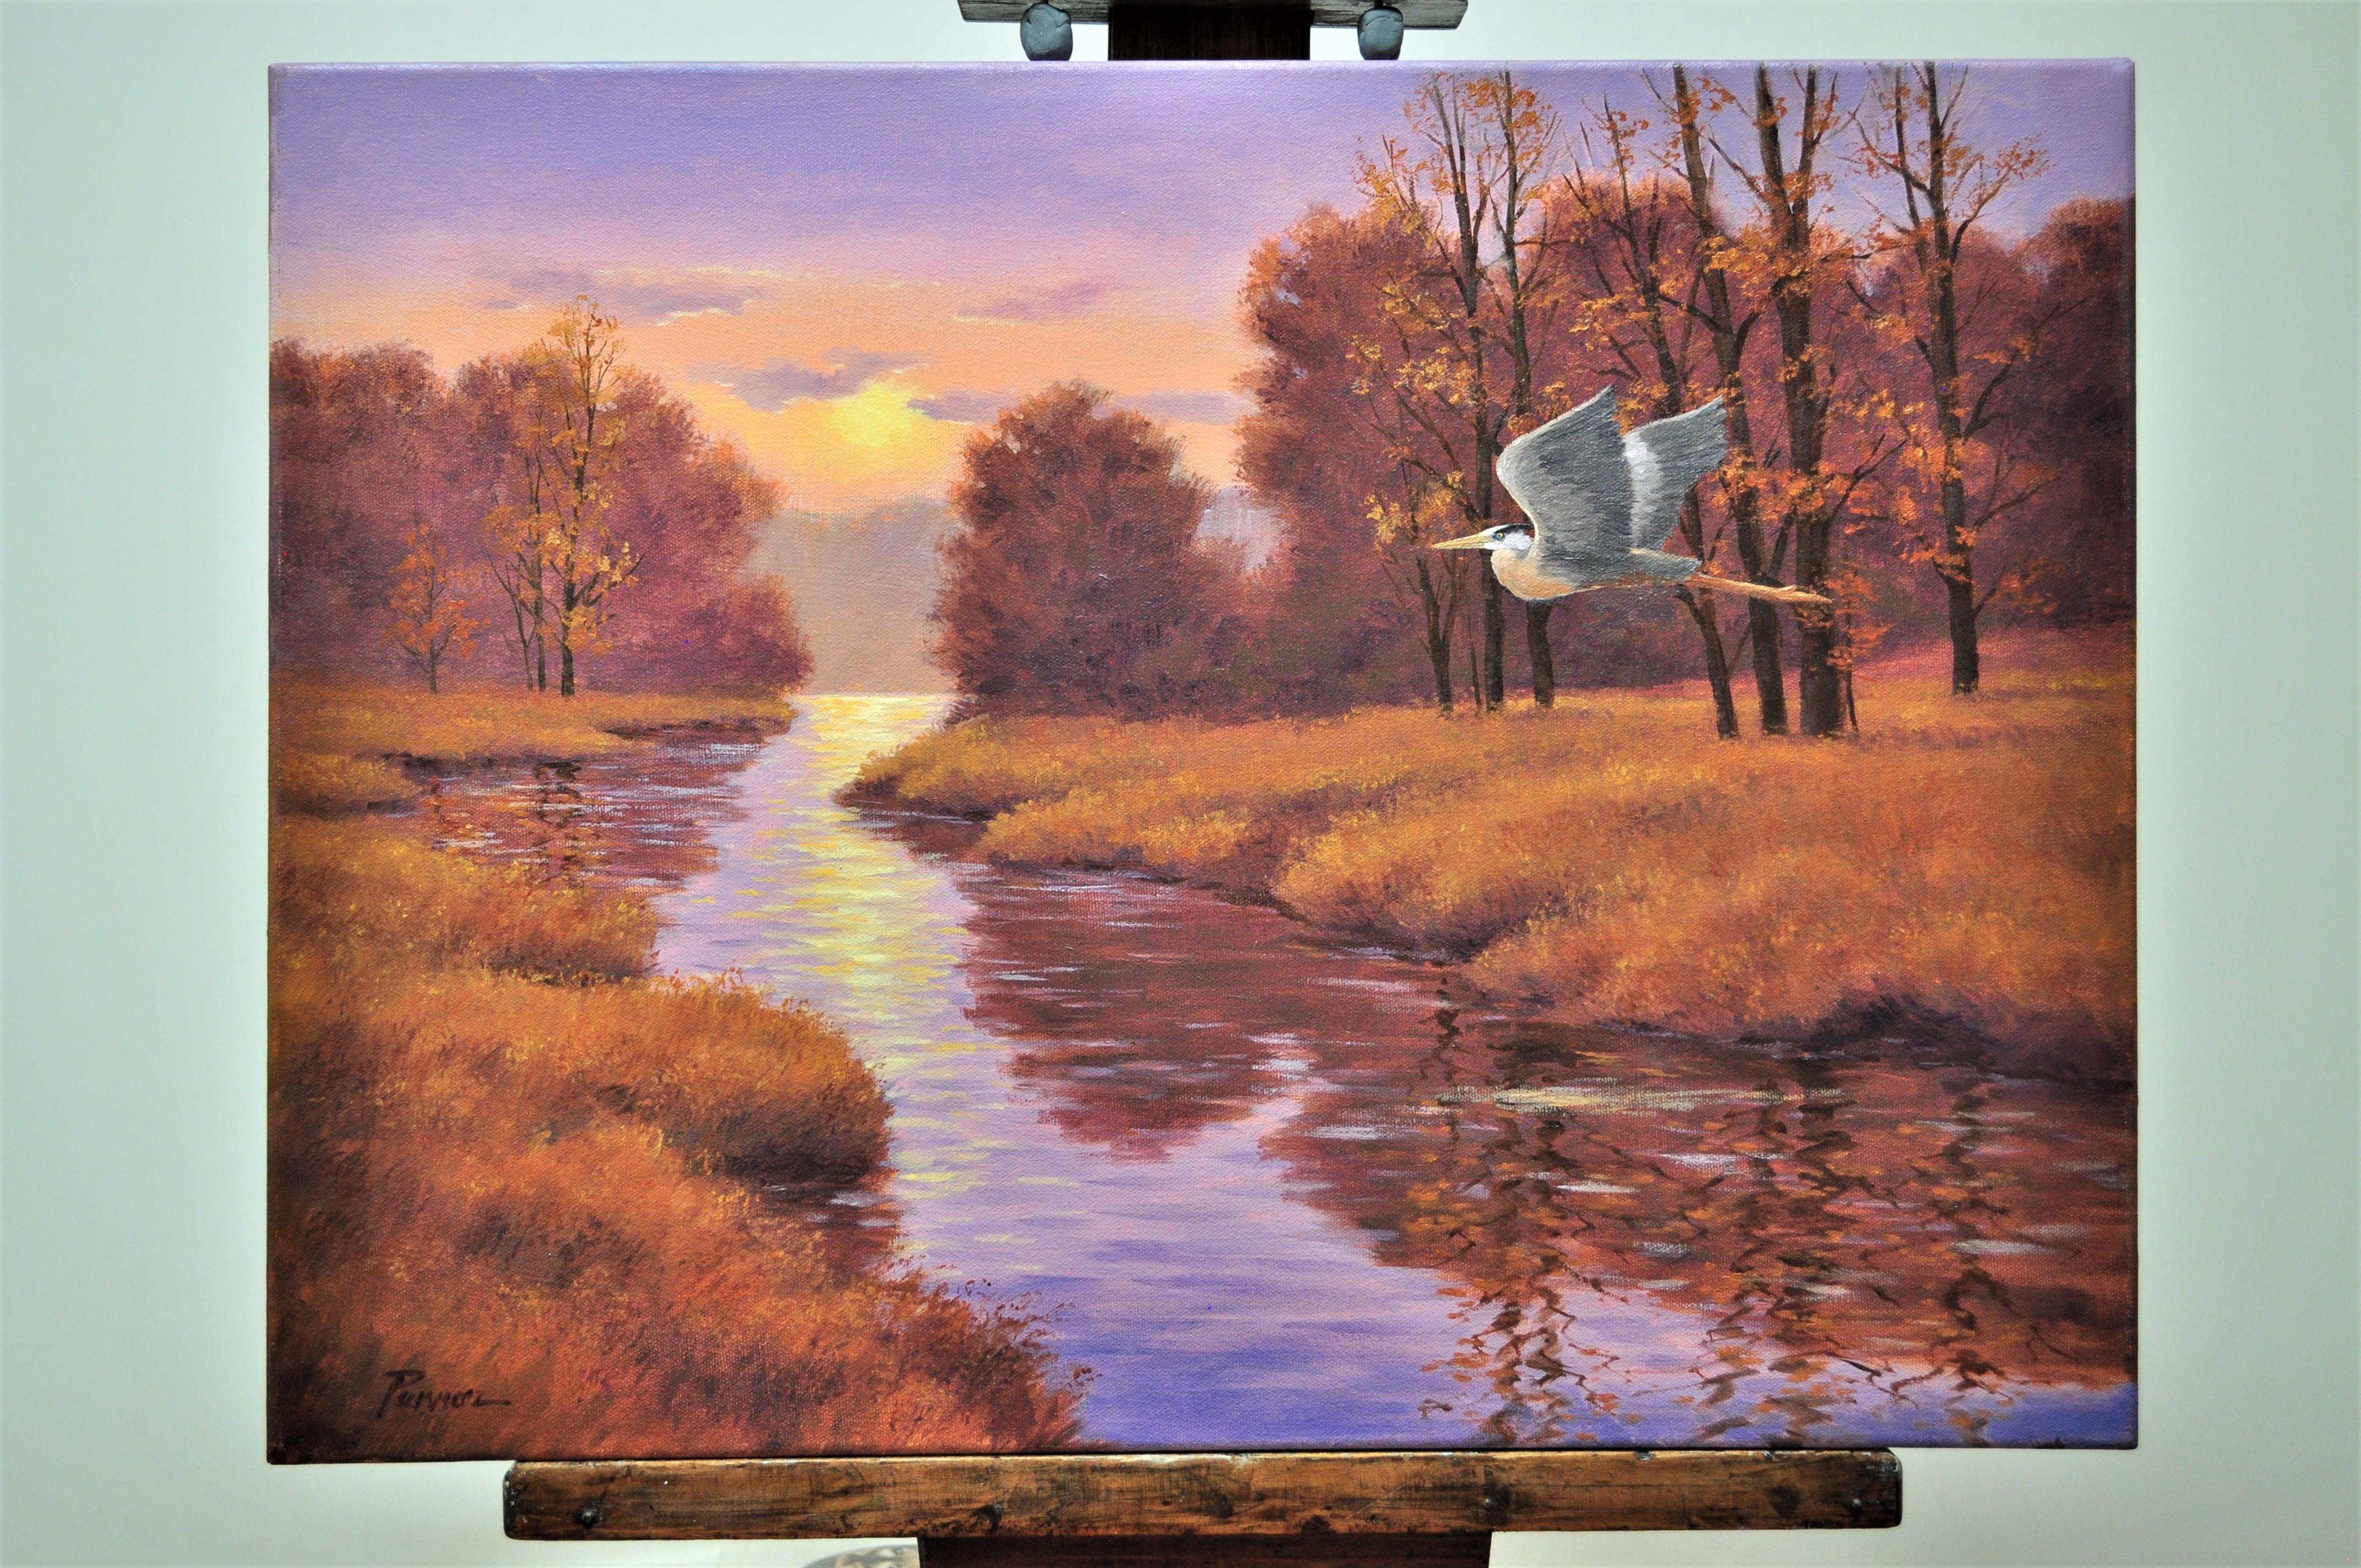 <p>Artist Comments<br>Evening when the sun glows on the river is a special time that gives me hope for life and living.  The blue heron glides along in its own peaceful world.  This painting was done with glazes of oil paint and textured with a